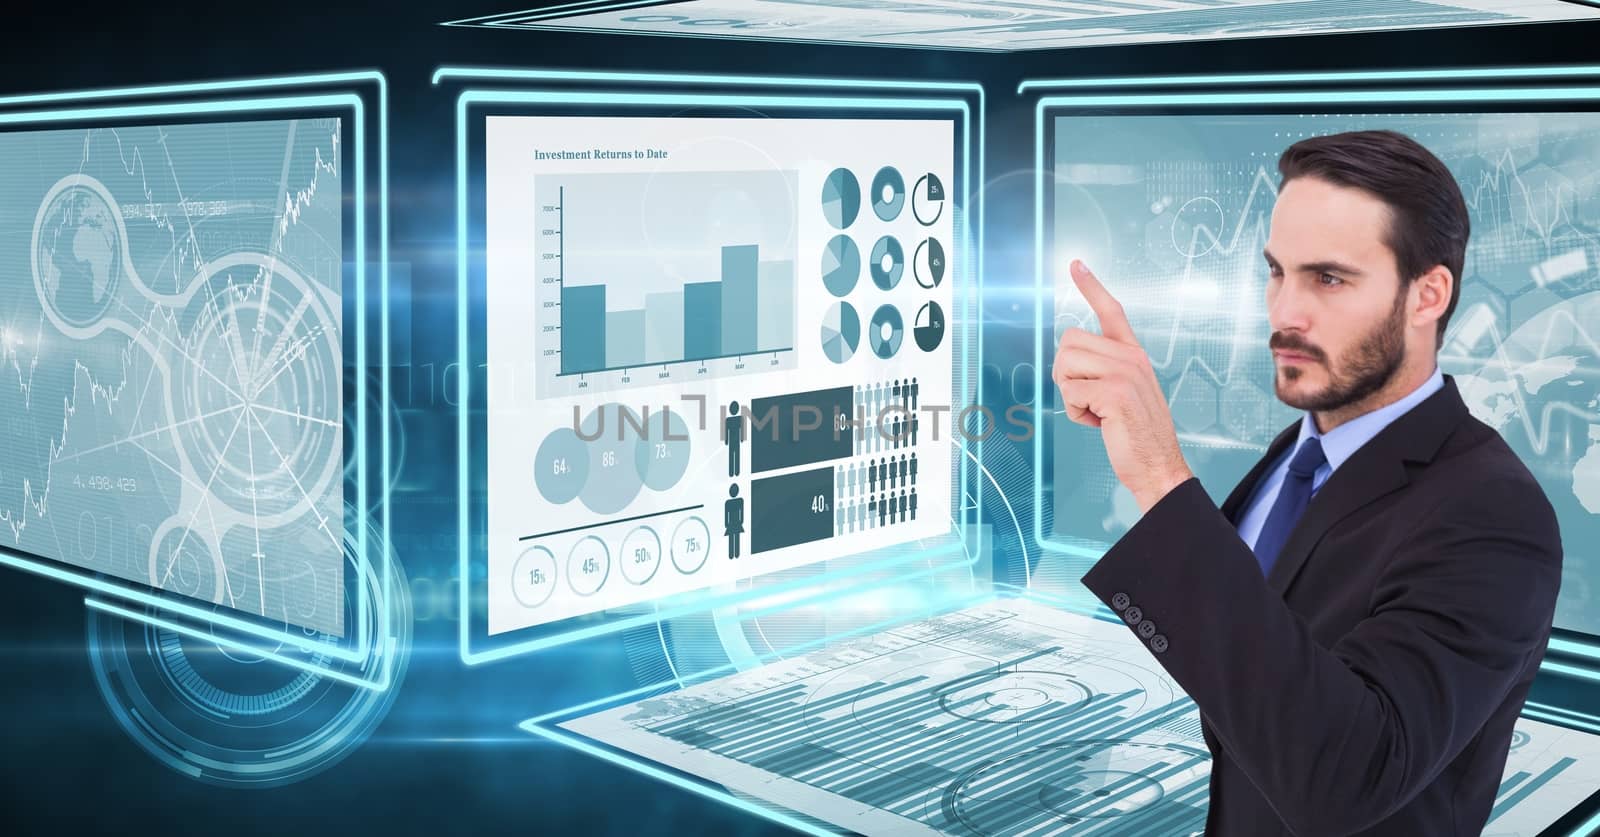 Digital composite of Businessman touching and interacting with technology interface panels